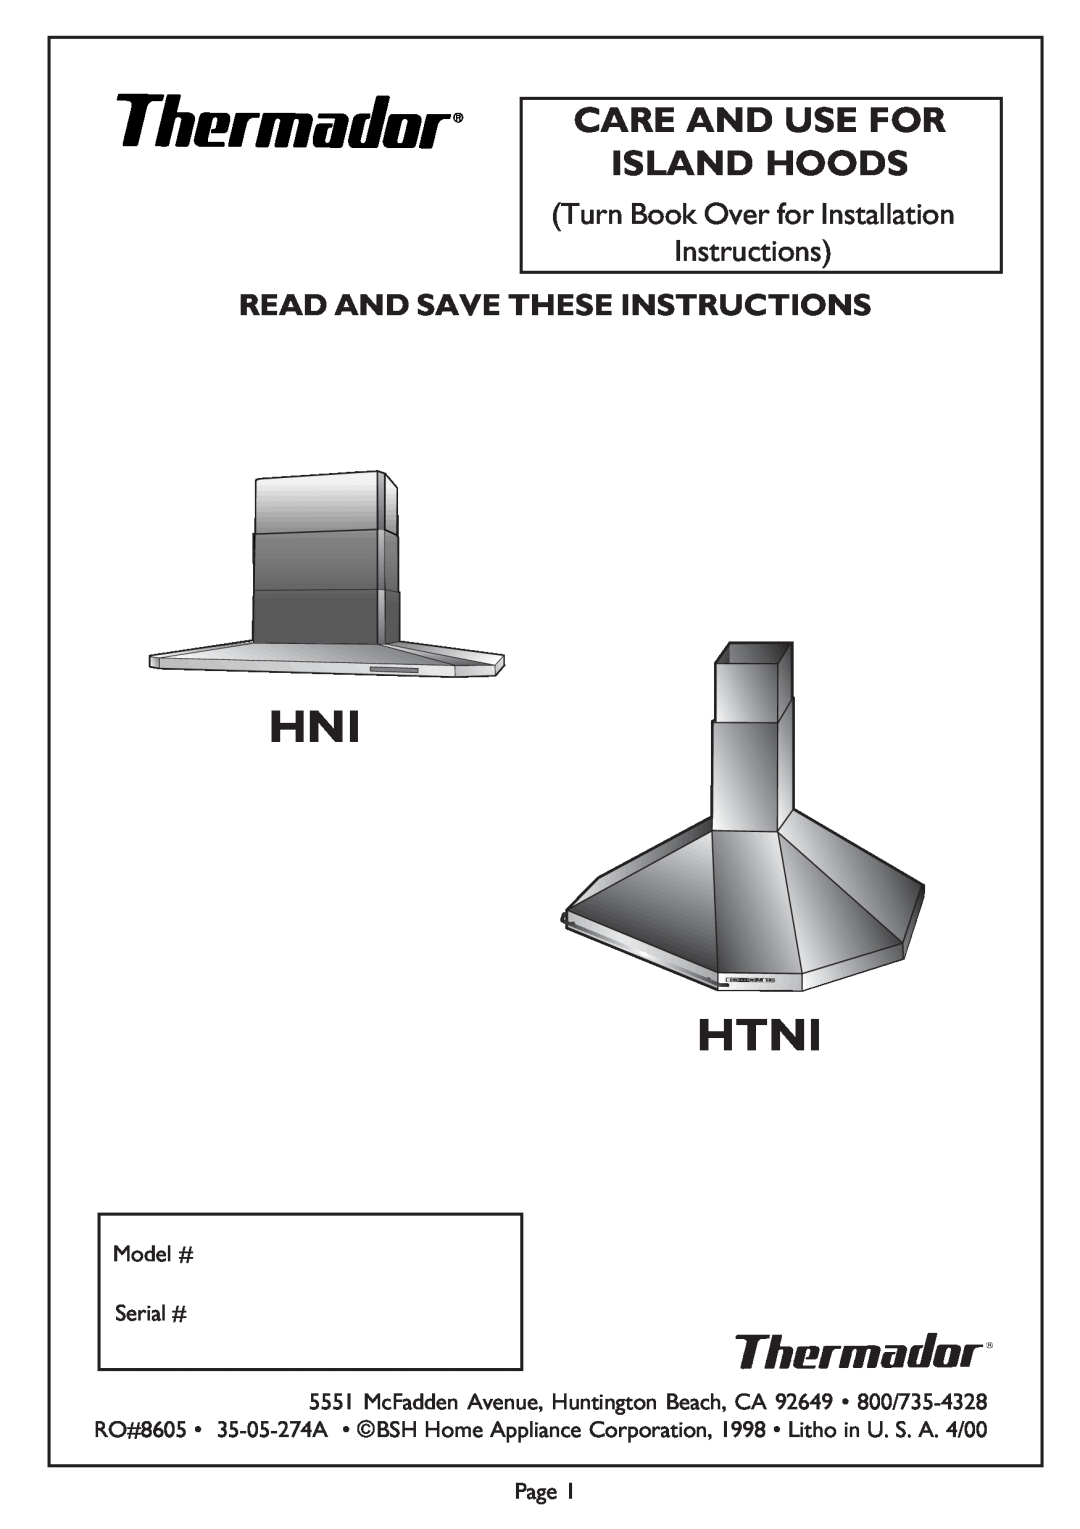 Thermador Thermador installation instructions Htni, Read And Save These Instructions, Care And Use For, Island Hoods 